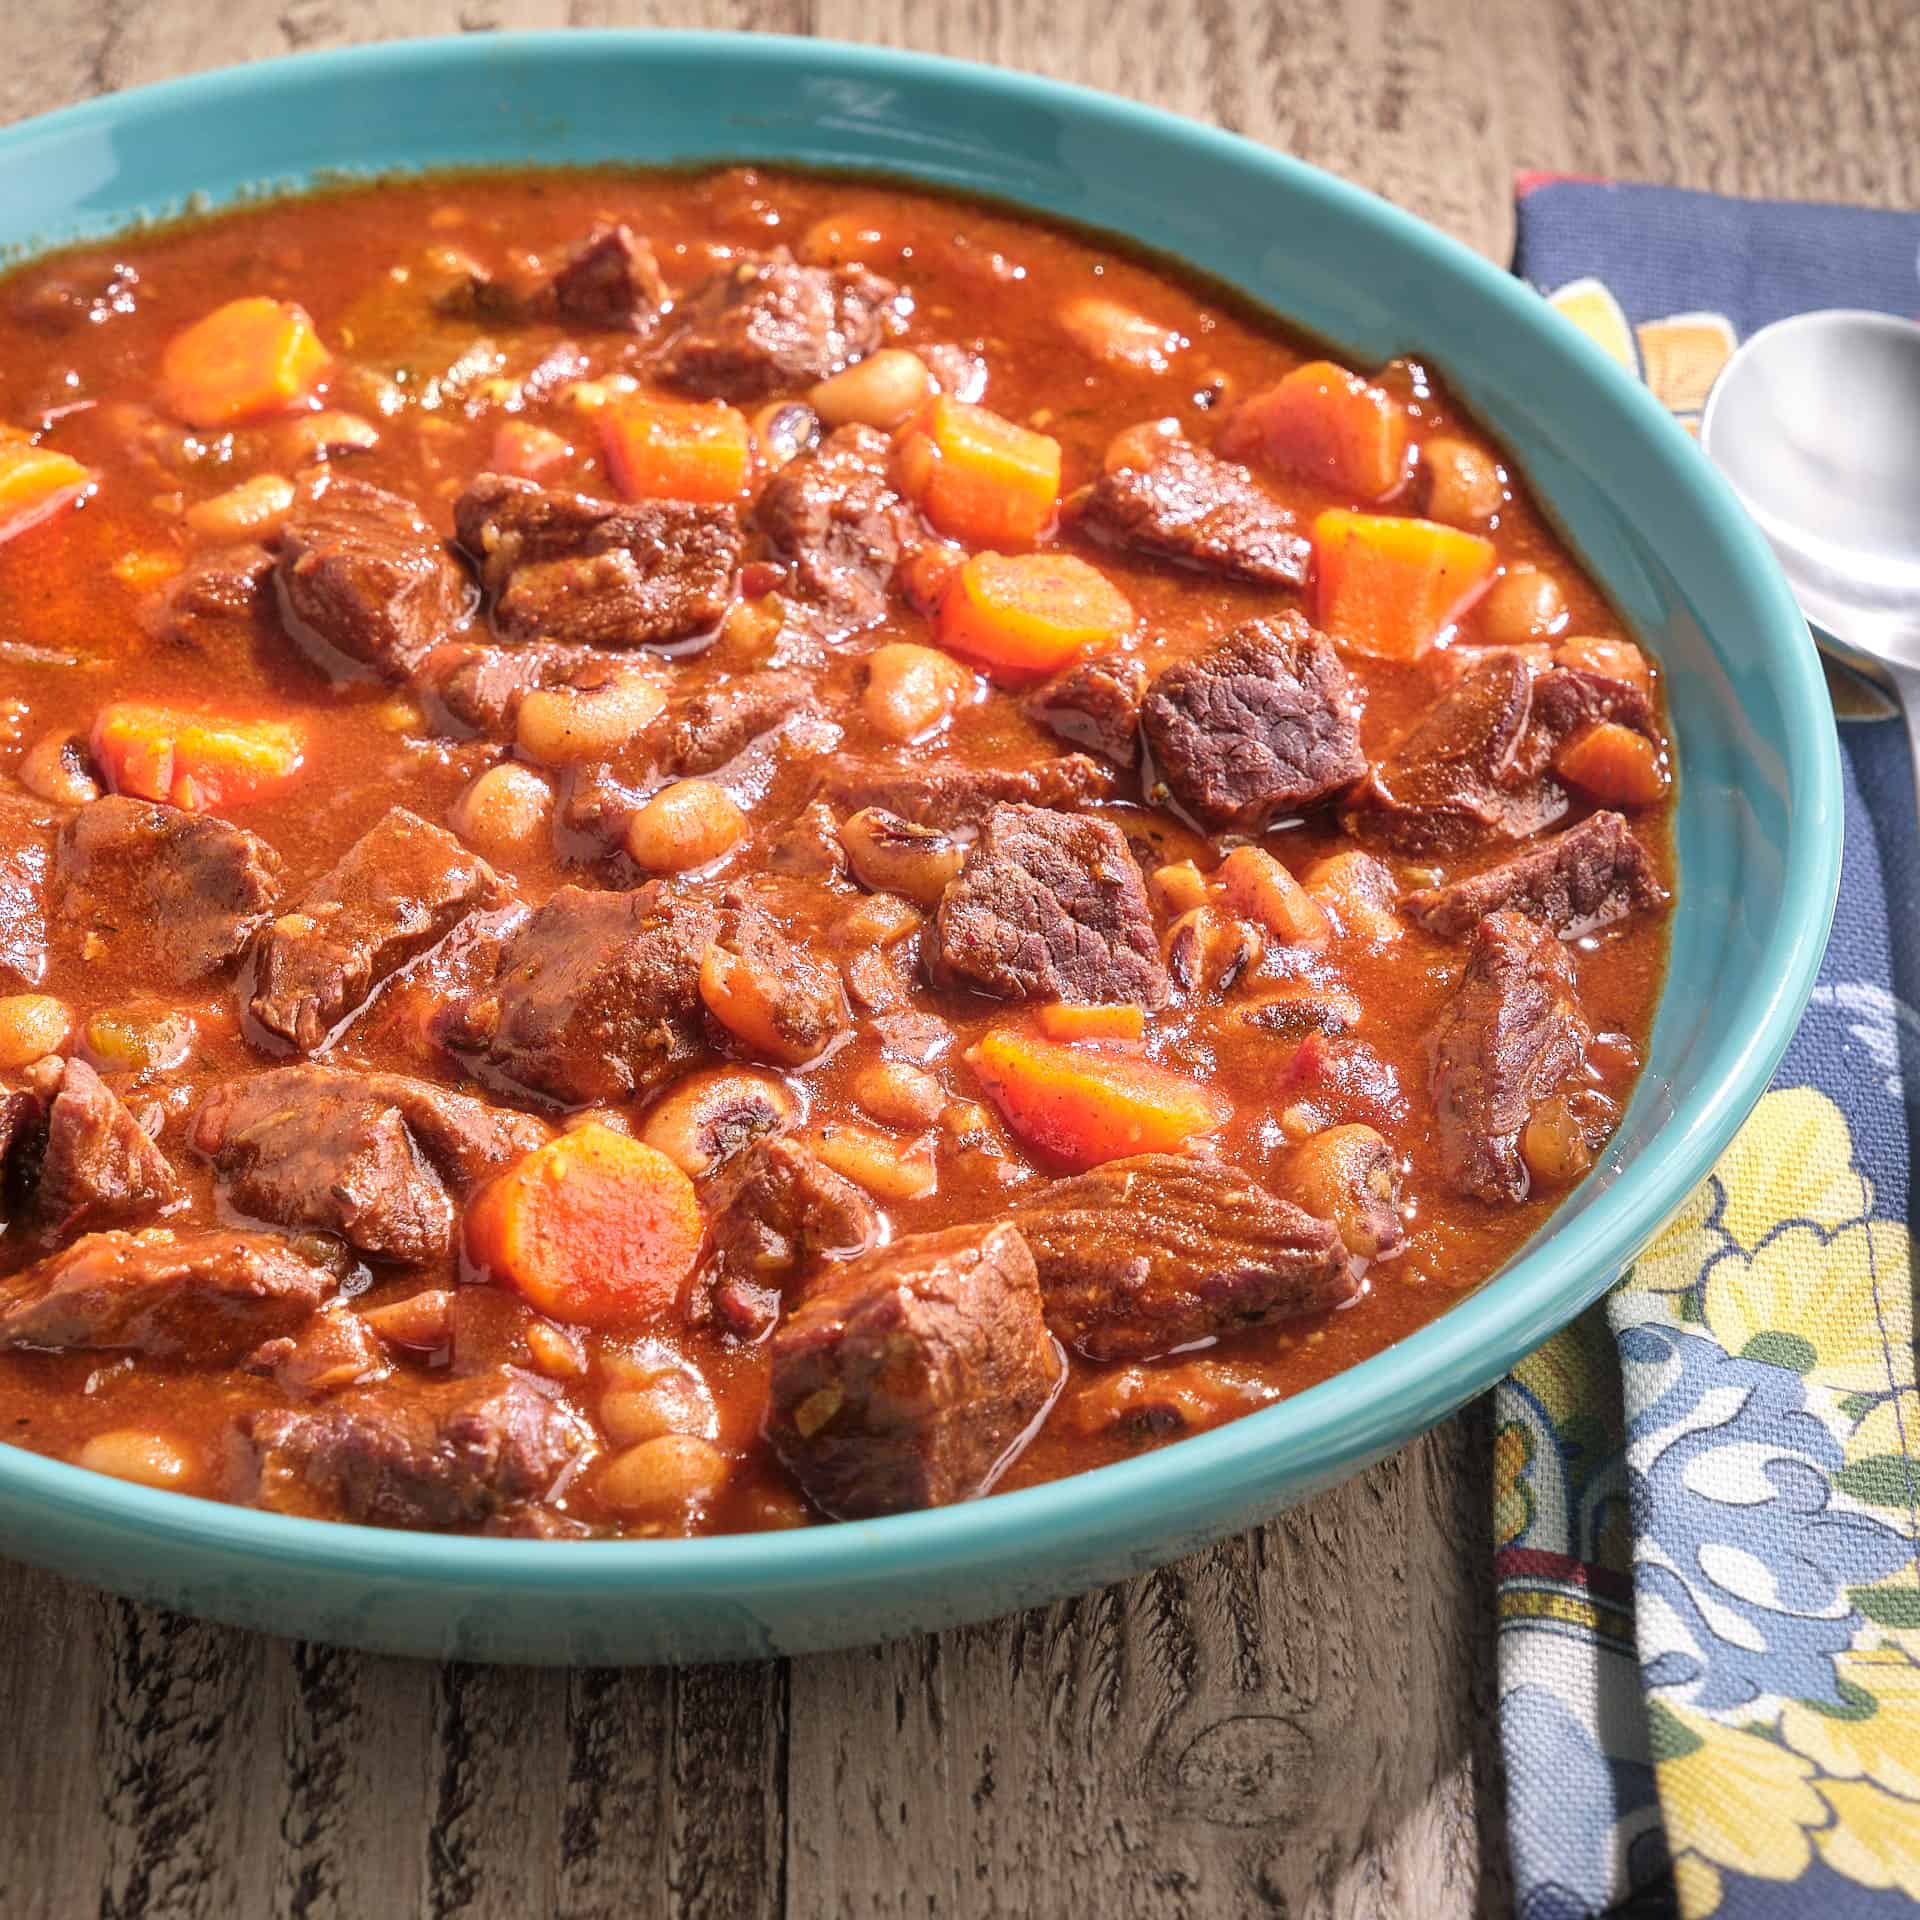 A bowl of beef and black-eyed pea stew